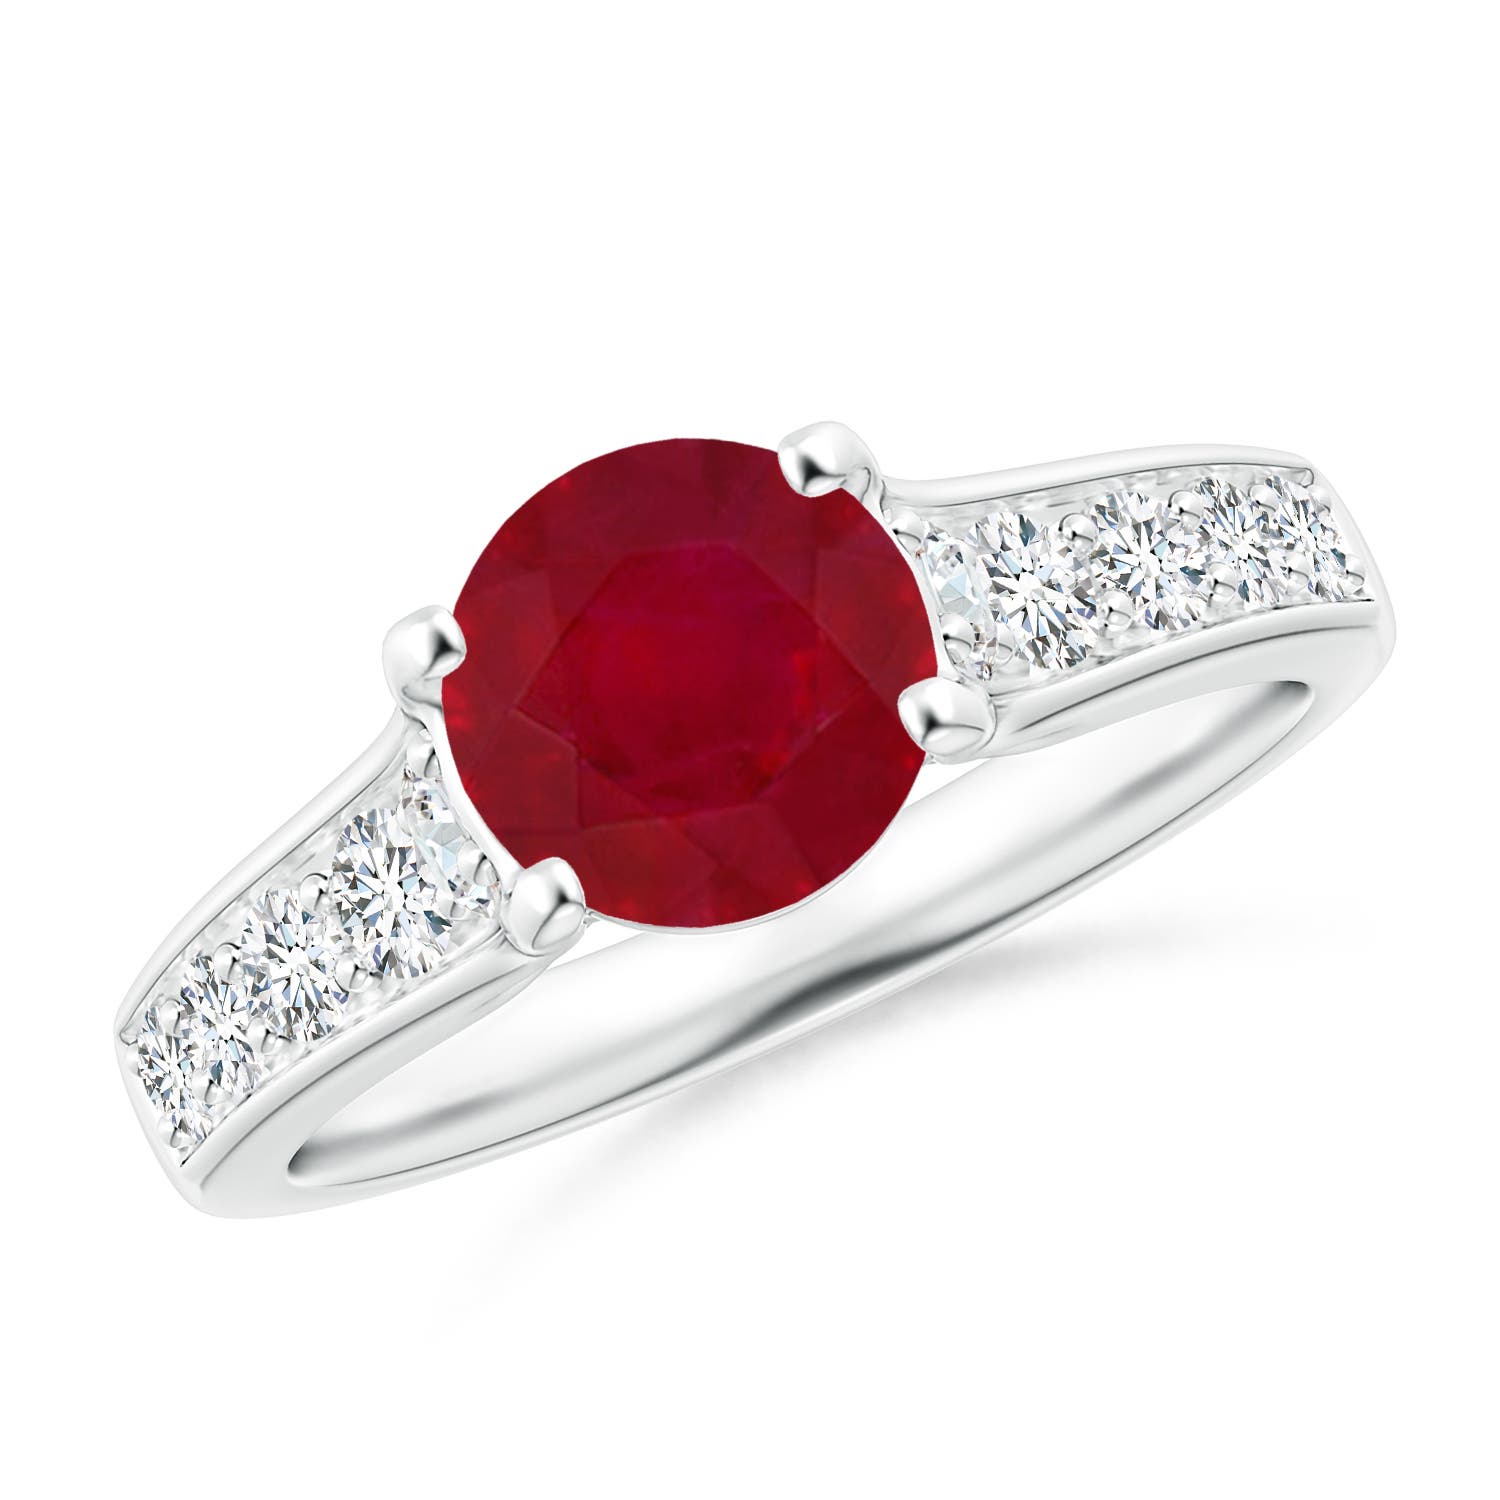 AA - Ruby / 1.94 CT / 14 KT White Gold